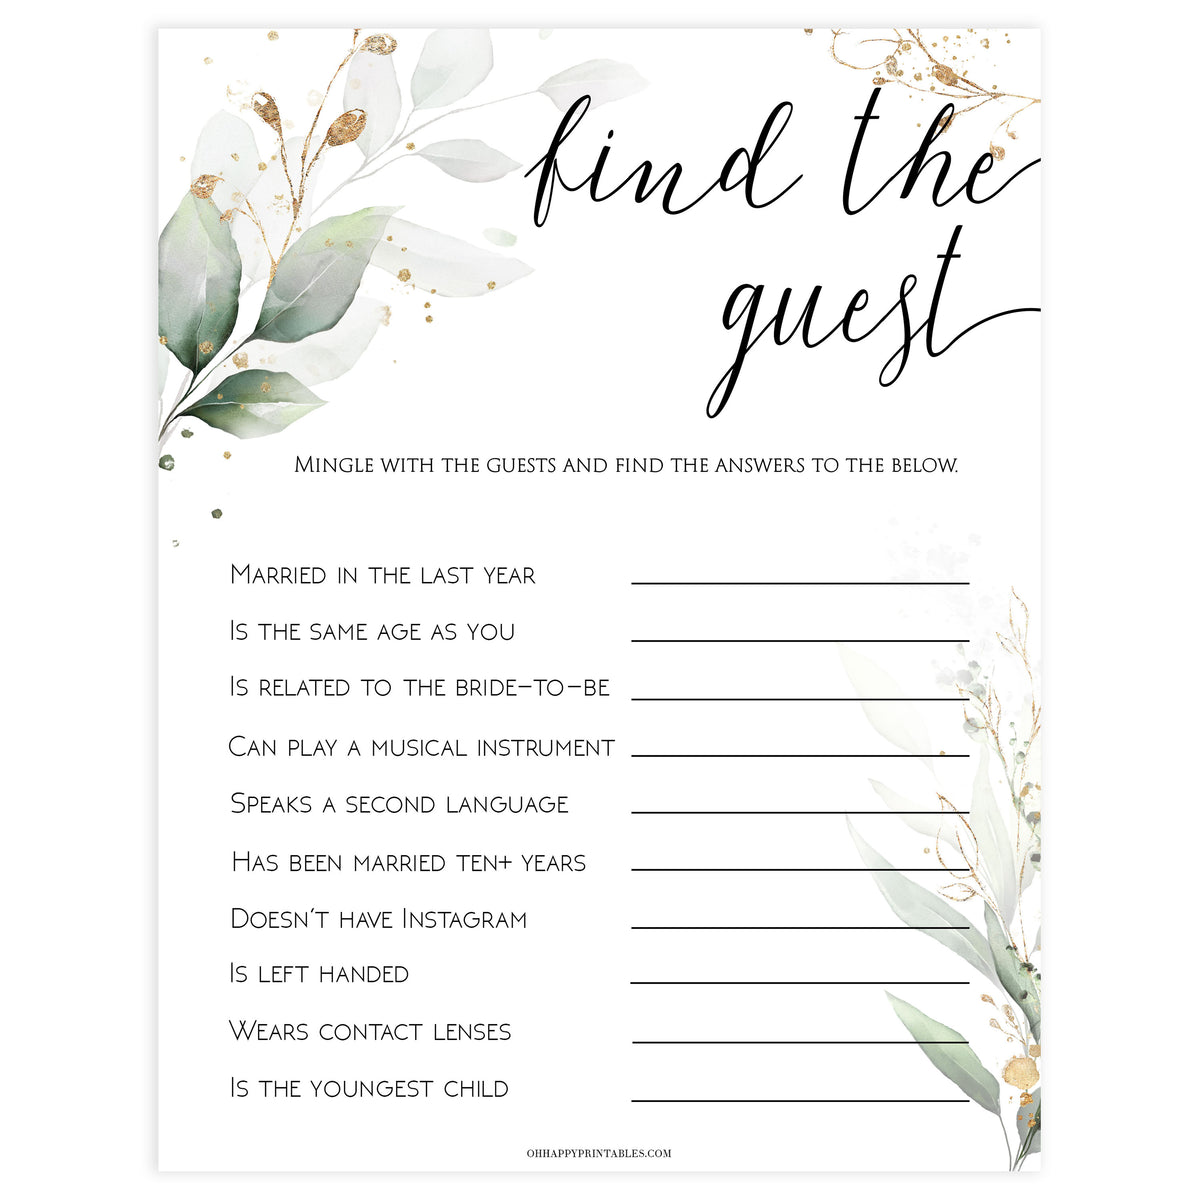 find the guest game, Printable bridal shower games, greenery bridal shower, gold leaf bridal shower games, fun bridal shower games, bridal shower game ideas, greenery bridal shower